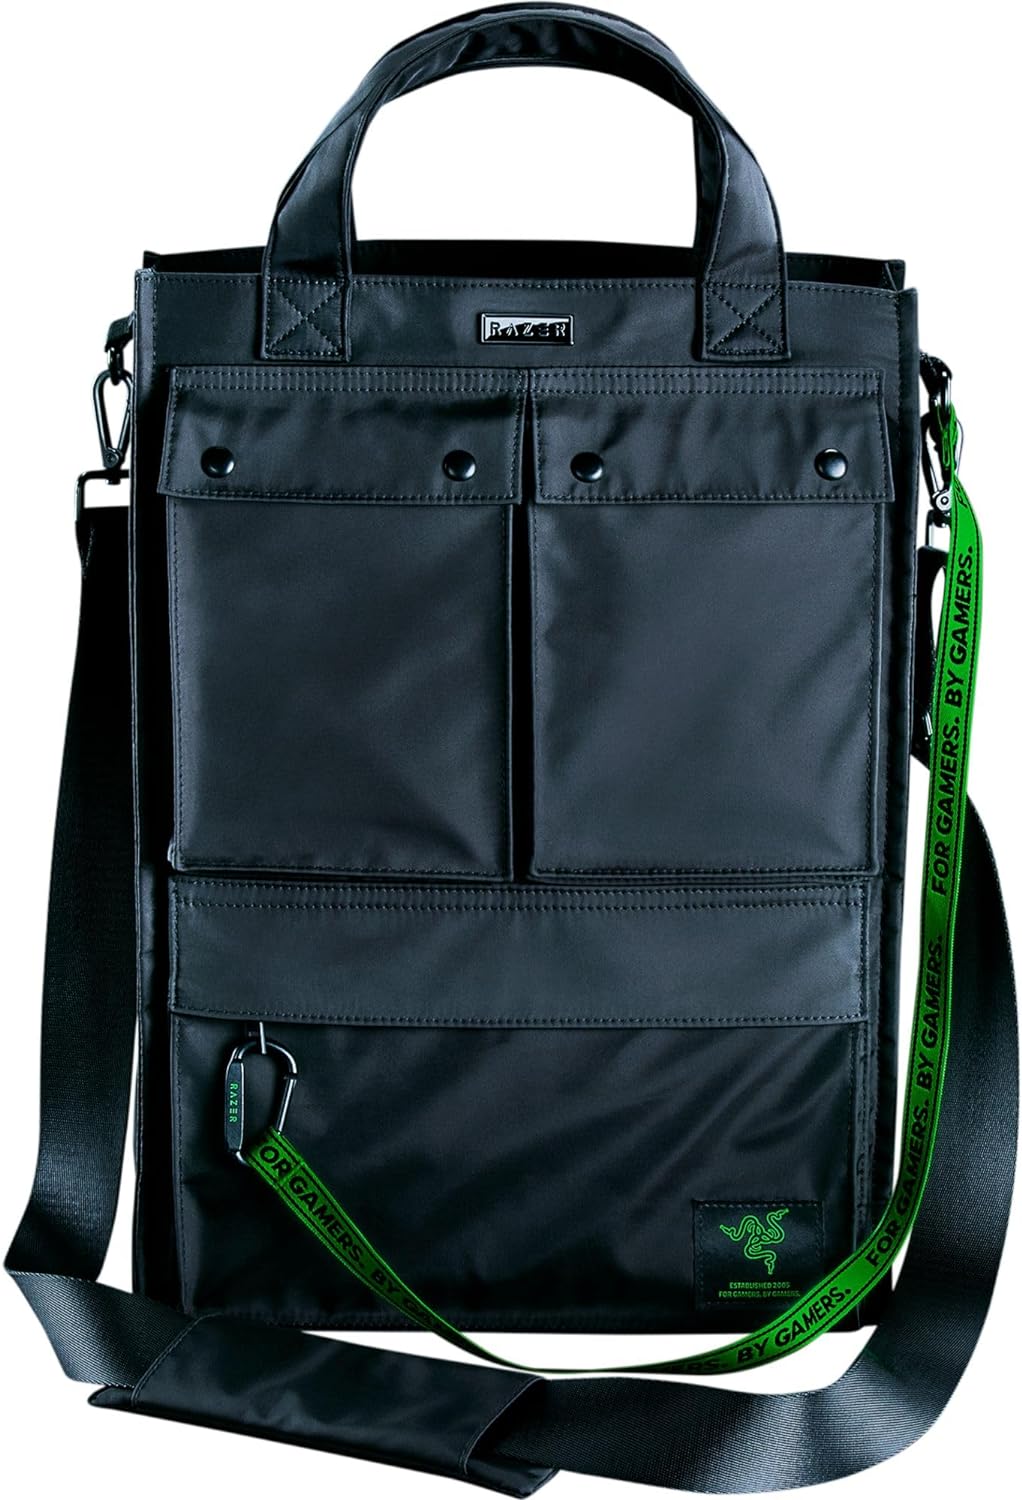 Razer Xanthus Tote Bag: Dedicated Padded Laptop Compartment - Fits up to 16" Laptops – Water Repellent Nylon - Two-Way Carry with Detachable Shoulder Strap